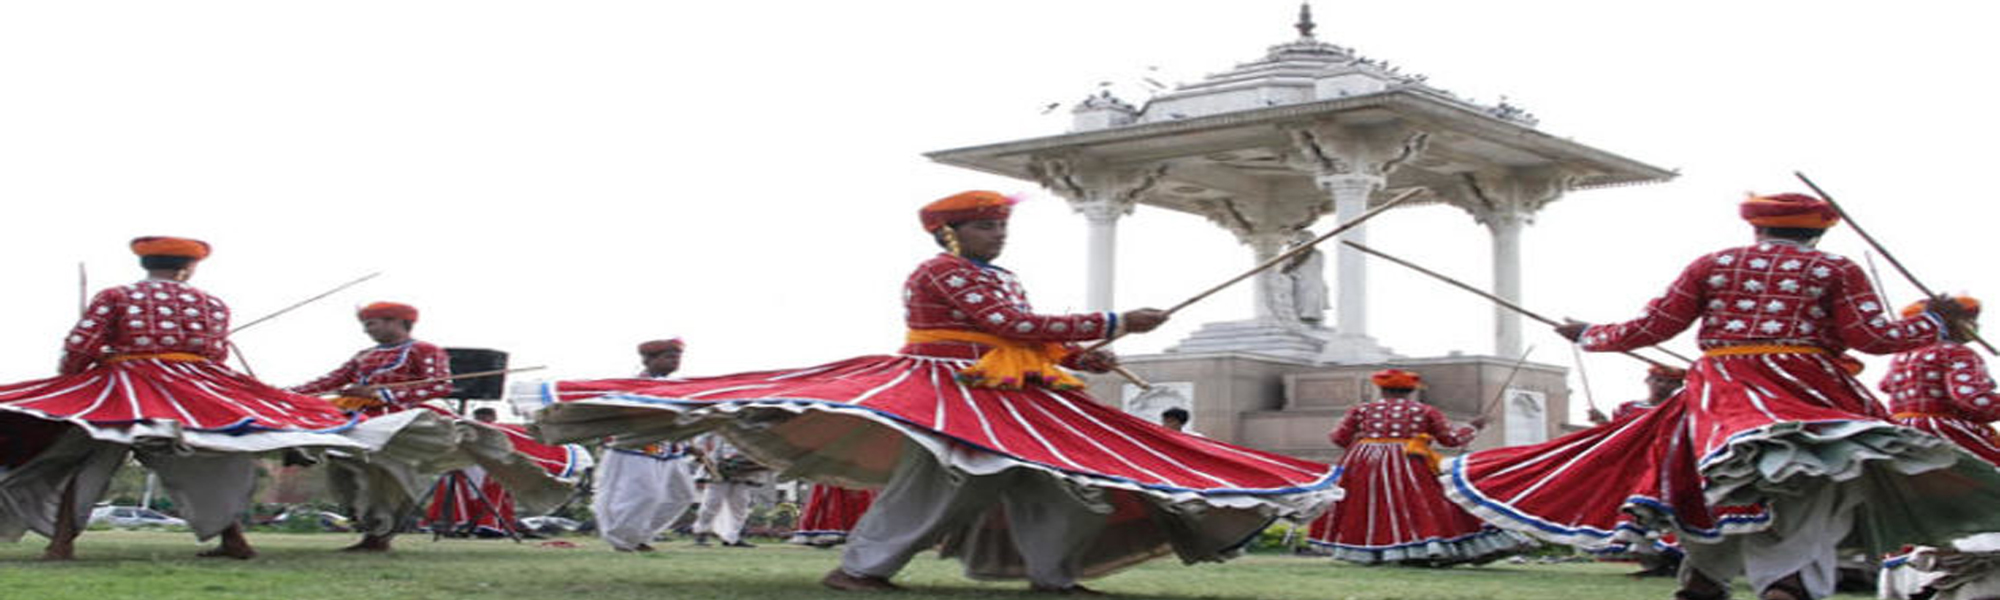 Marwar Festival Tours Packages in India